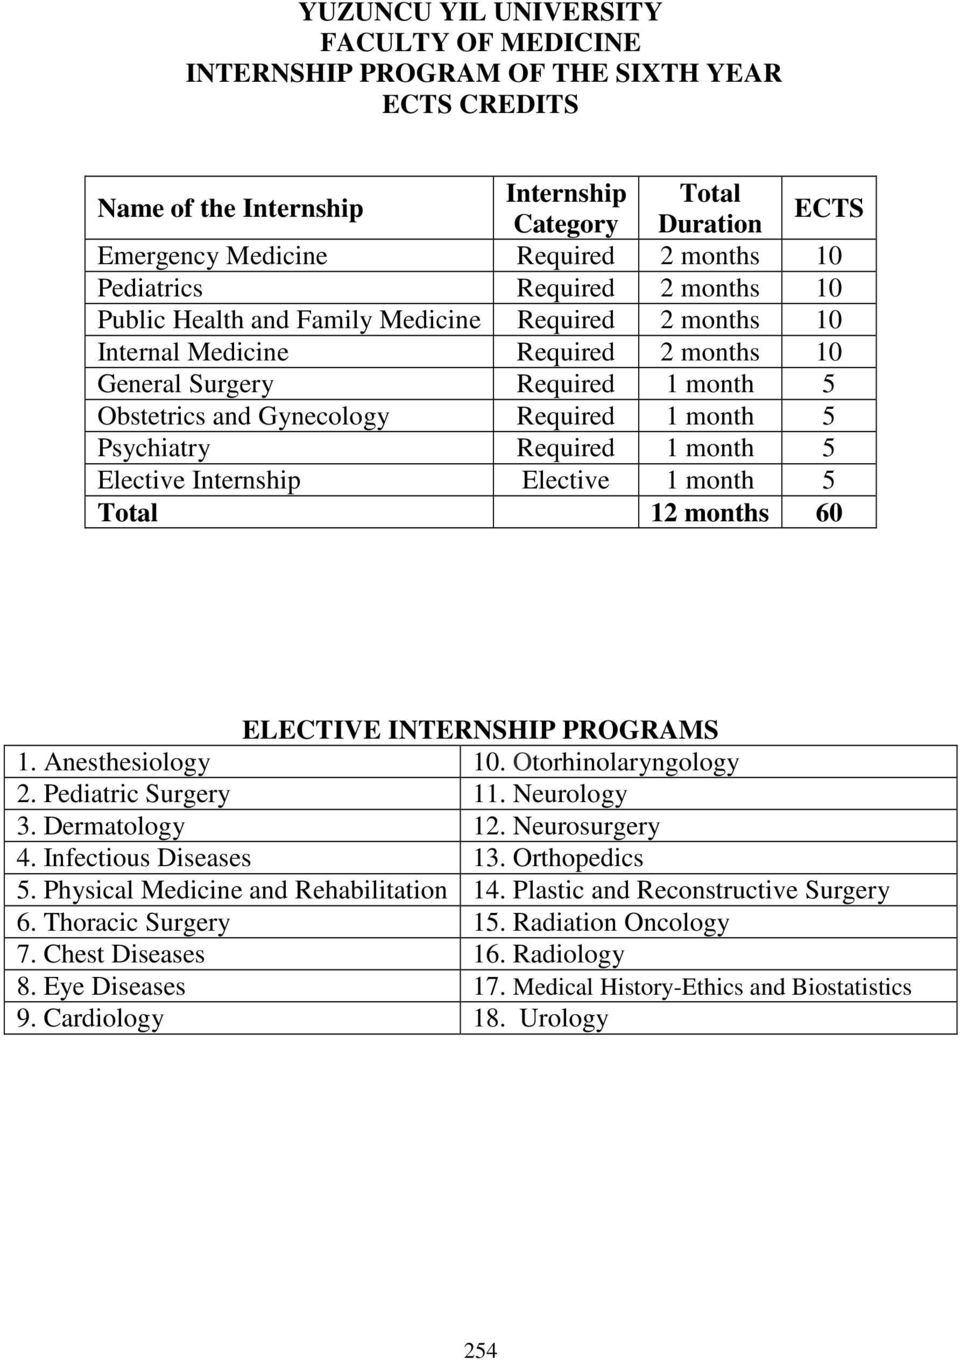 month 5 Psychiatry Required 1 month 5 Elective Internship Elective 1 month 5 Total 12 months 60 ELECTIVE INTERNSHIP PROGRAMS 1. Anesthesiology 10. Otorhinolaryngology 2. Pediatric Surgery 11.